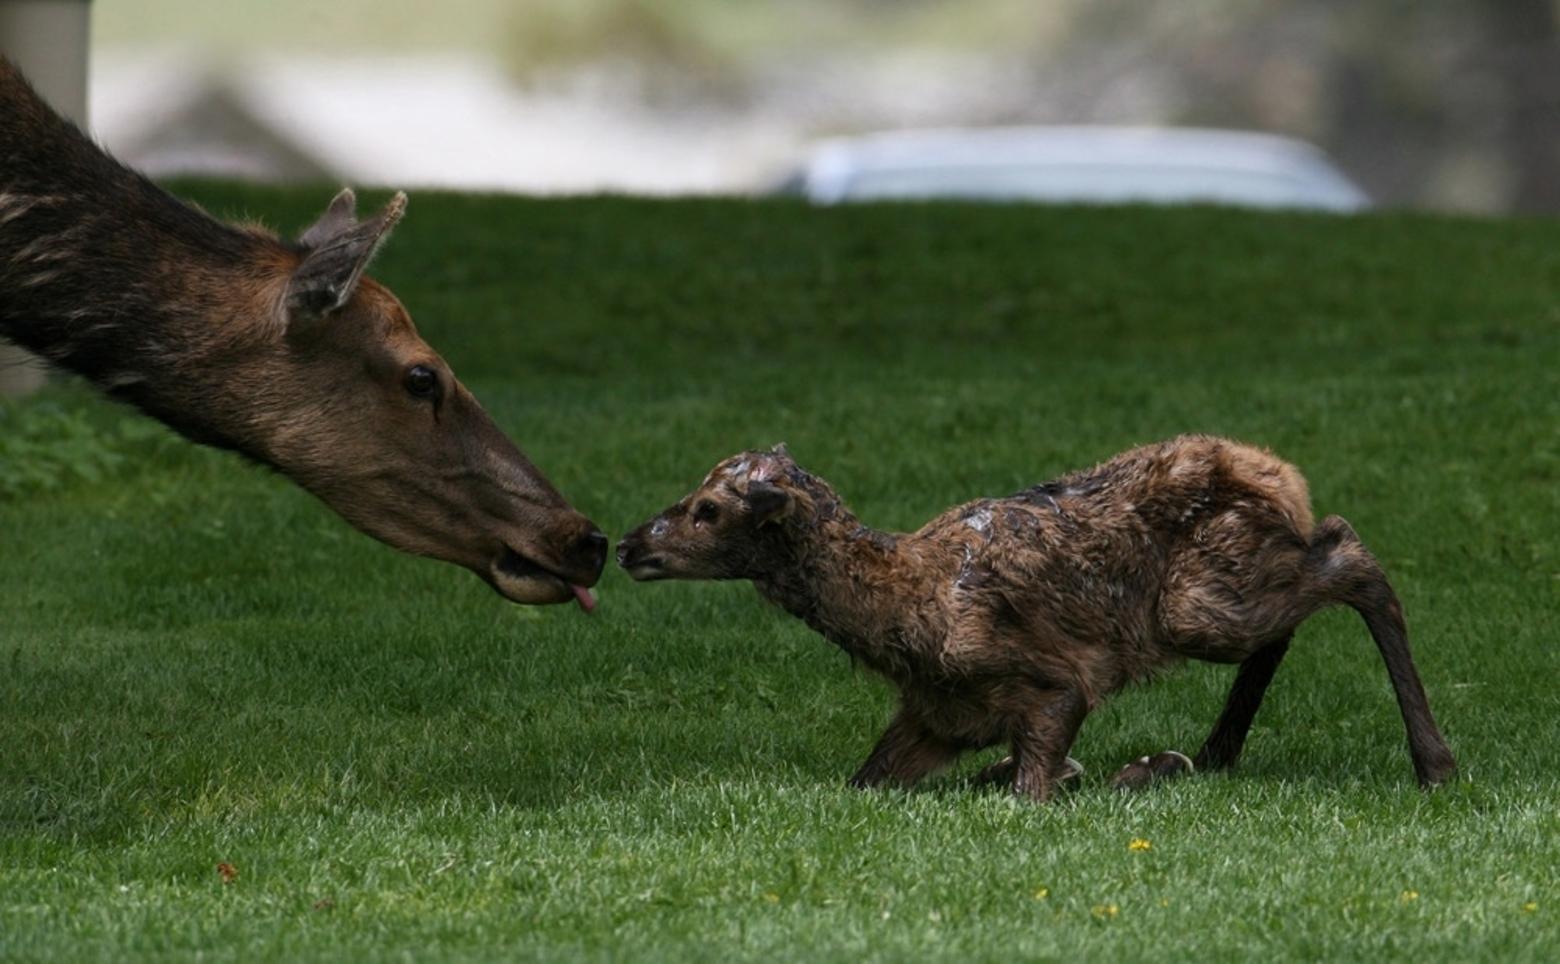 Elk mother and newborn calf on the lawn at Mammoth Hot Springs, headquarters for Yellowstone National Park. Photo by Jim Peaco/NPS